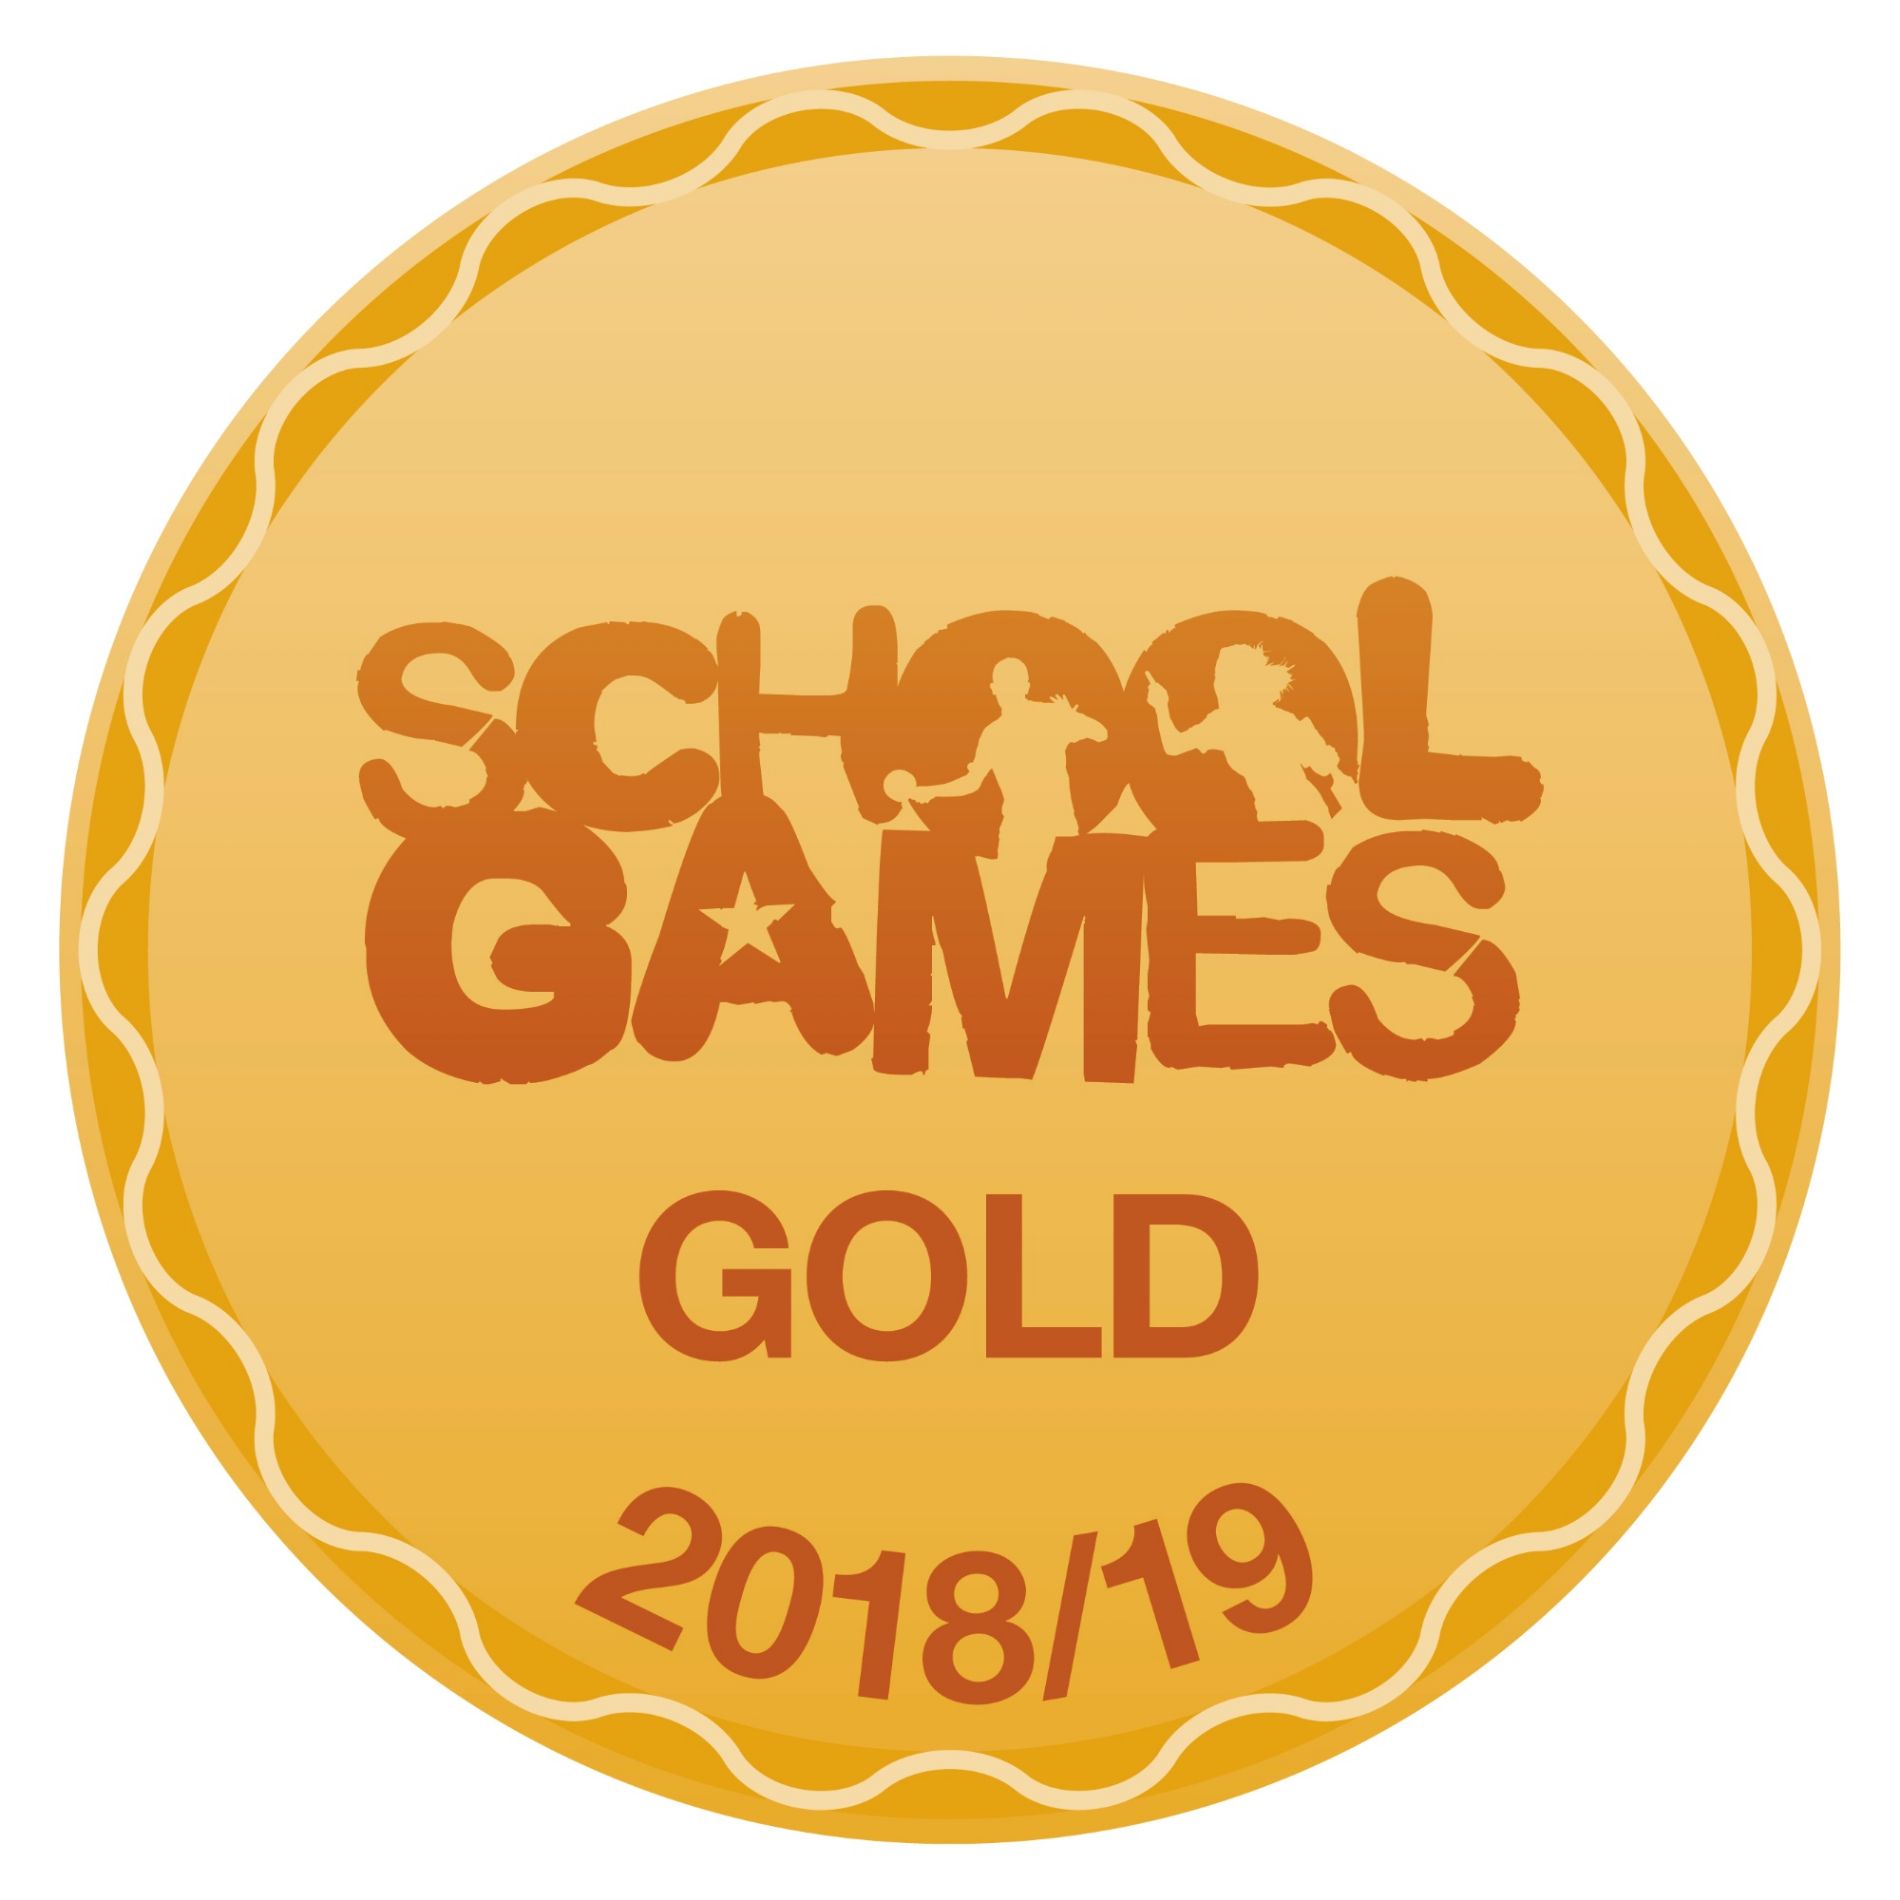 Primary Games 2018/19